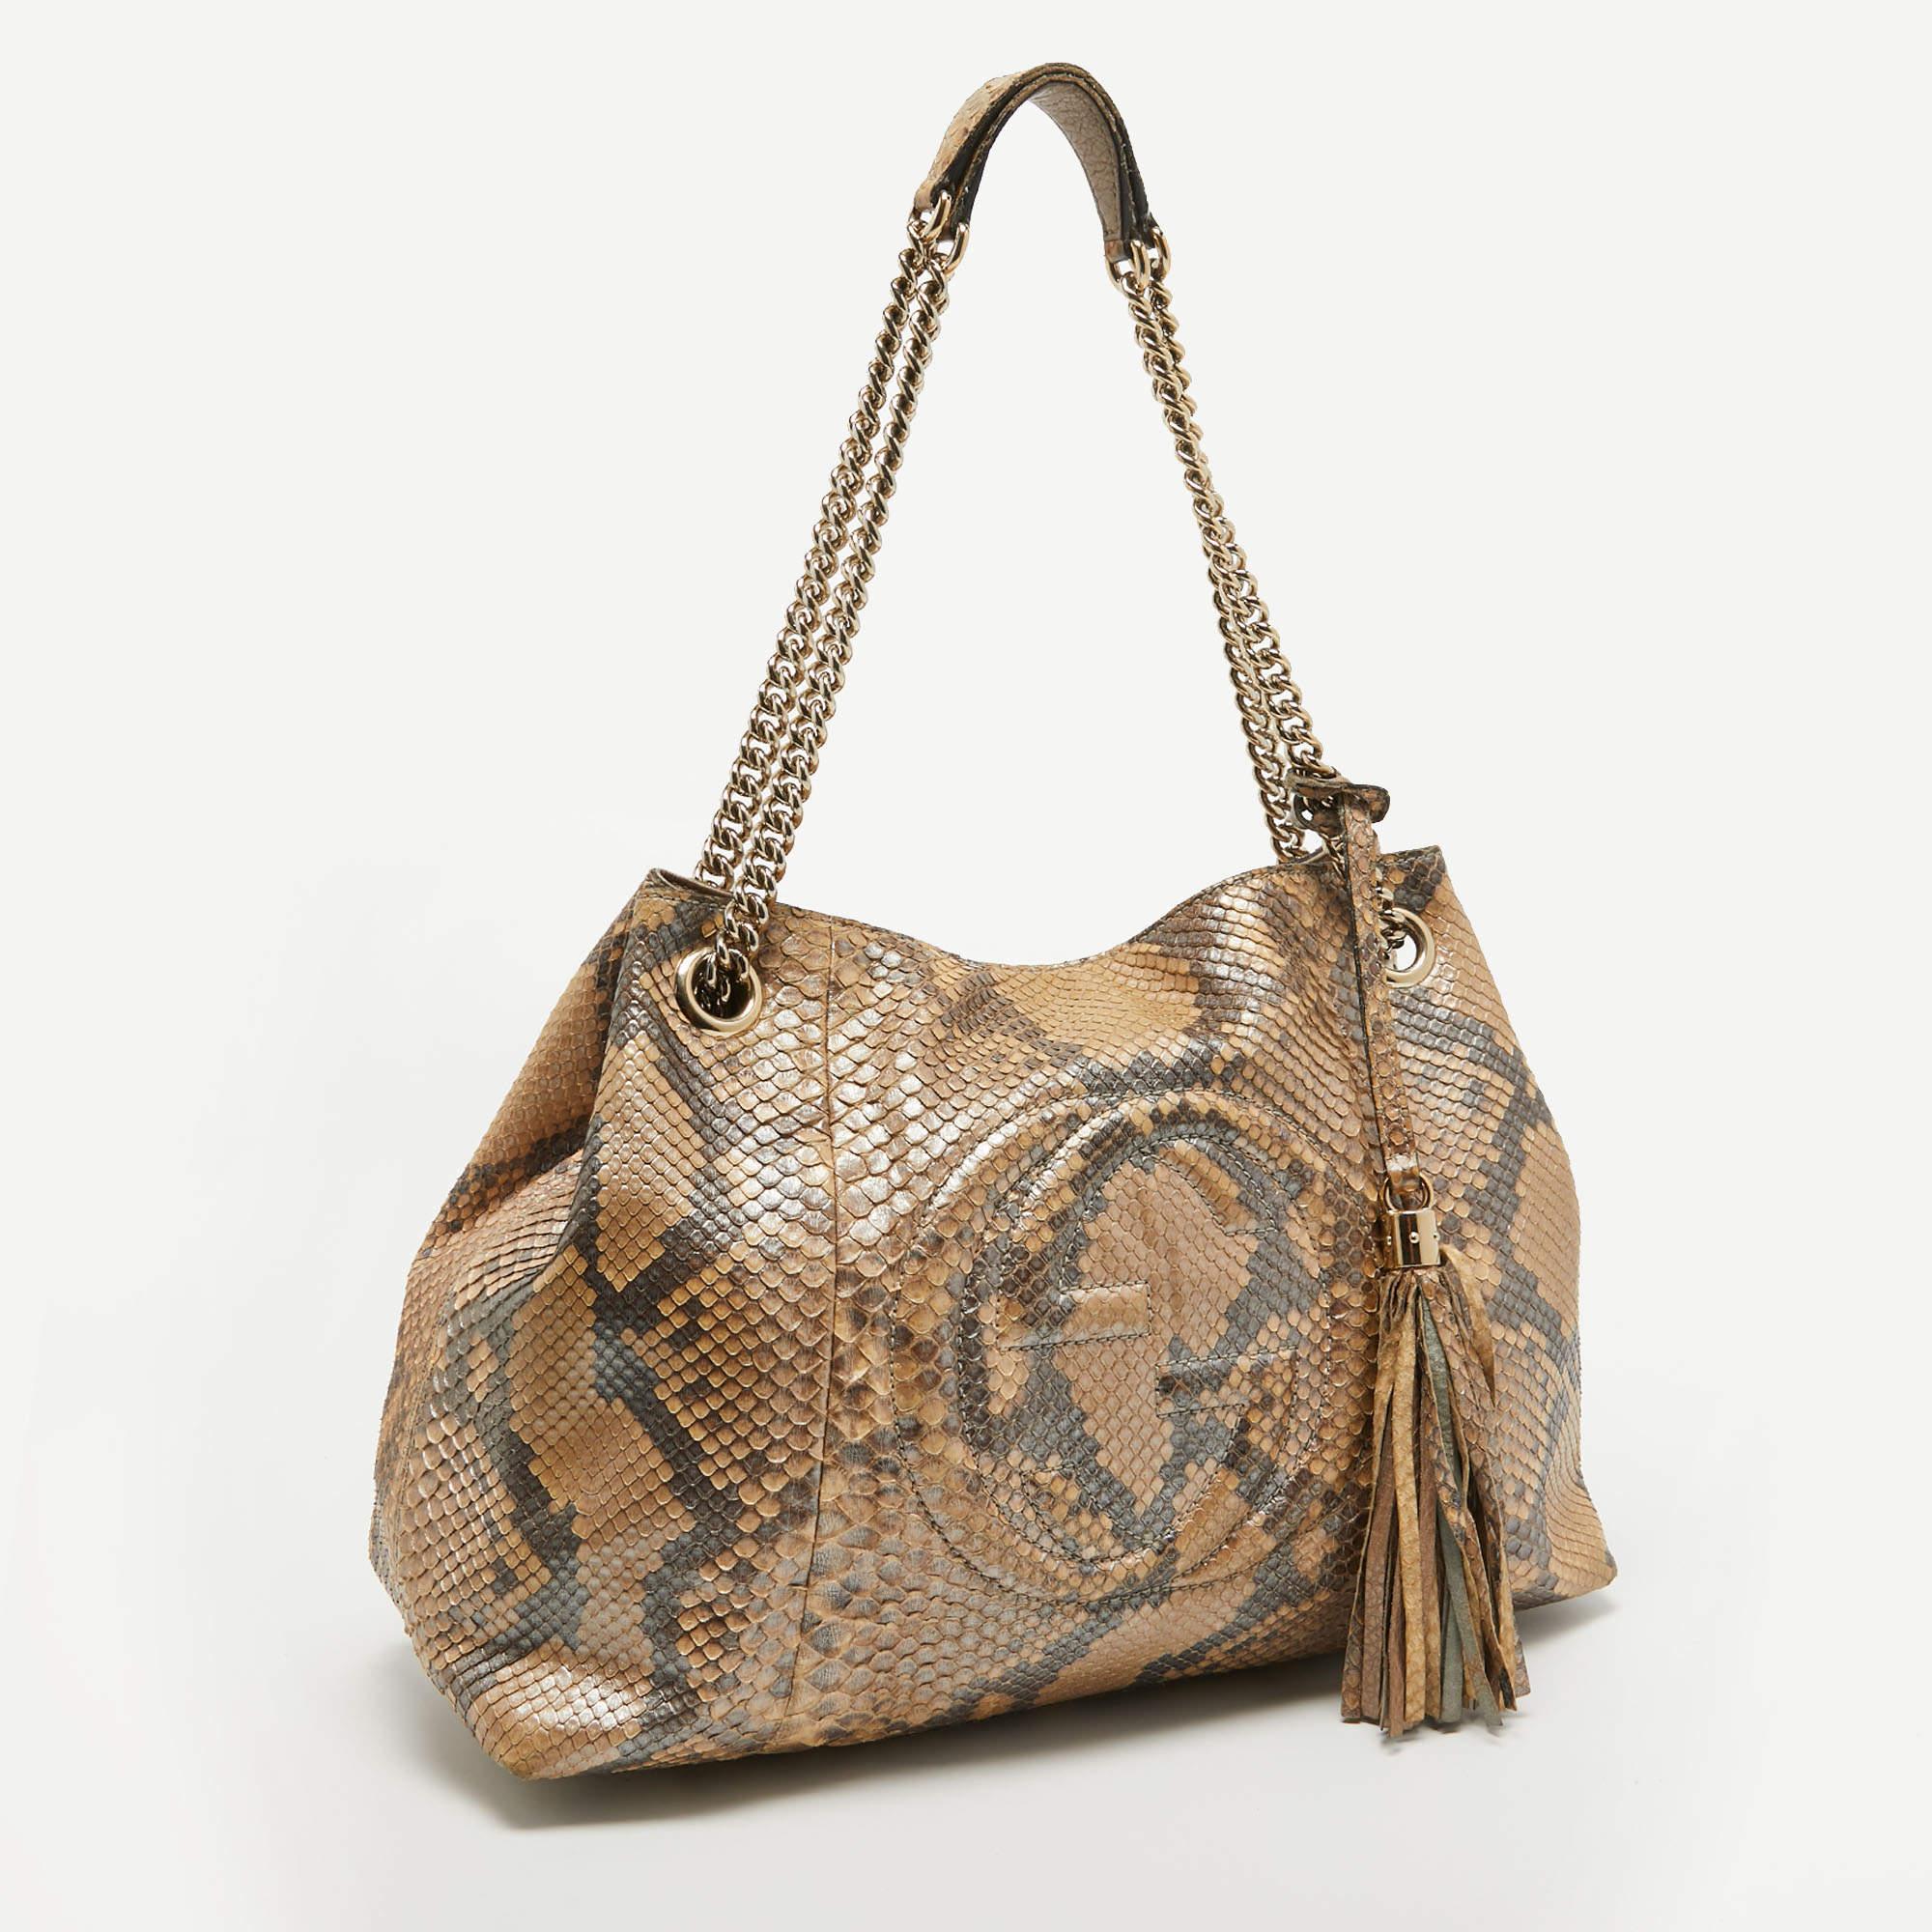 Thoughtful details, high quality, and everyday convenience mark this designer bag for women by Gucci. The bag is sewn with skill to deliver a refined look and an impeccable finish.

